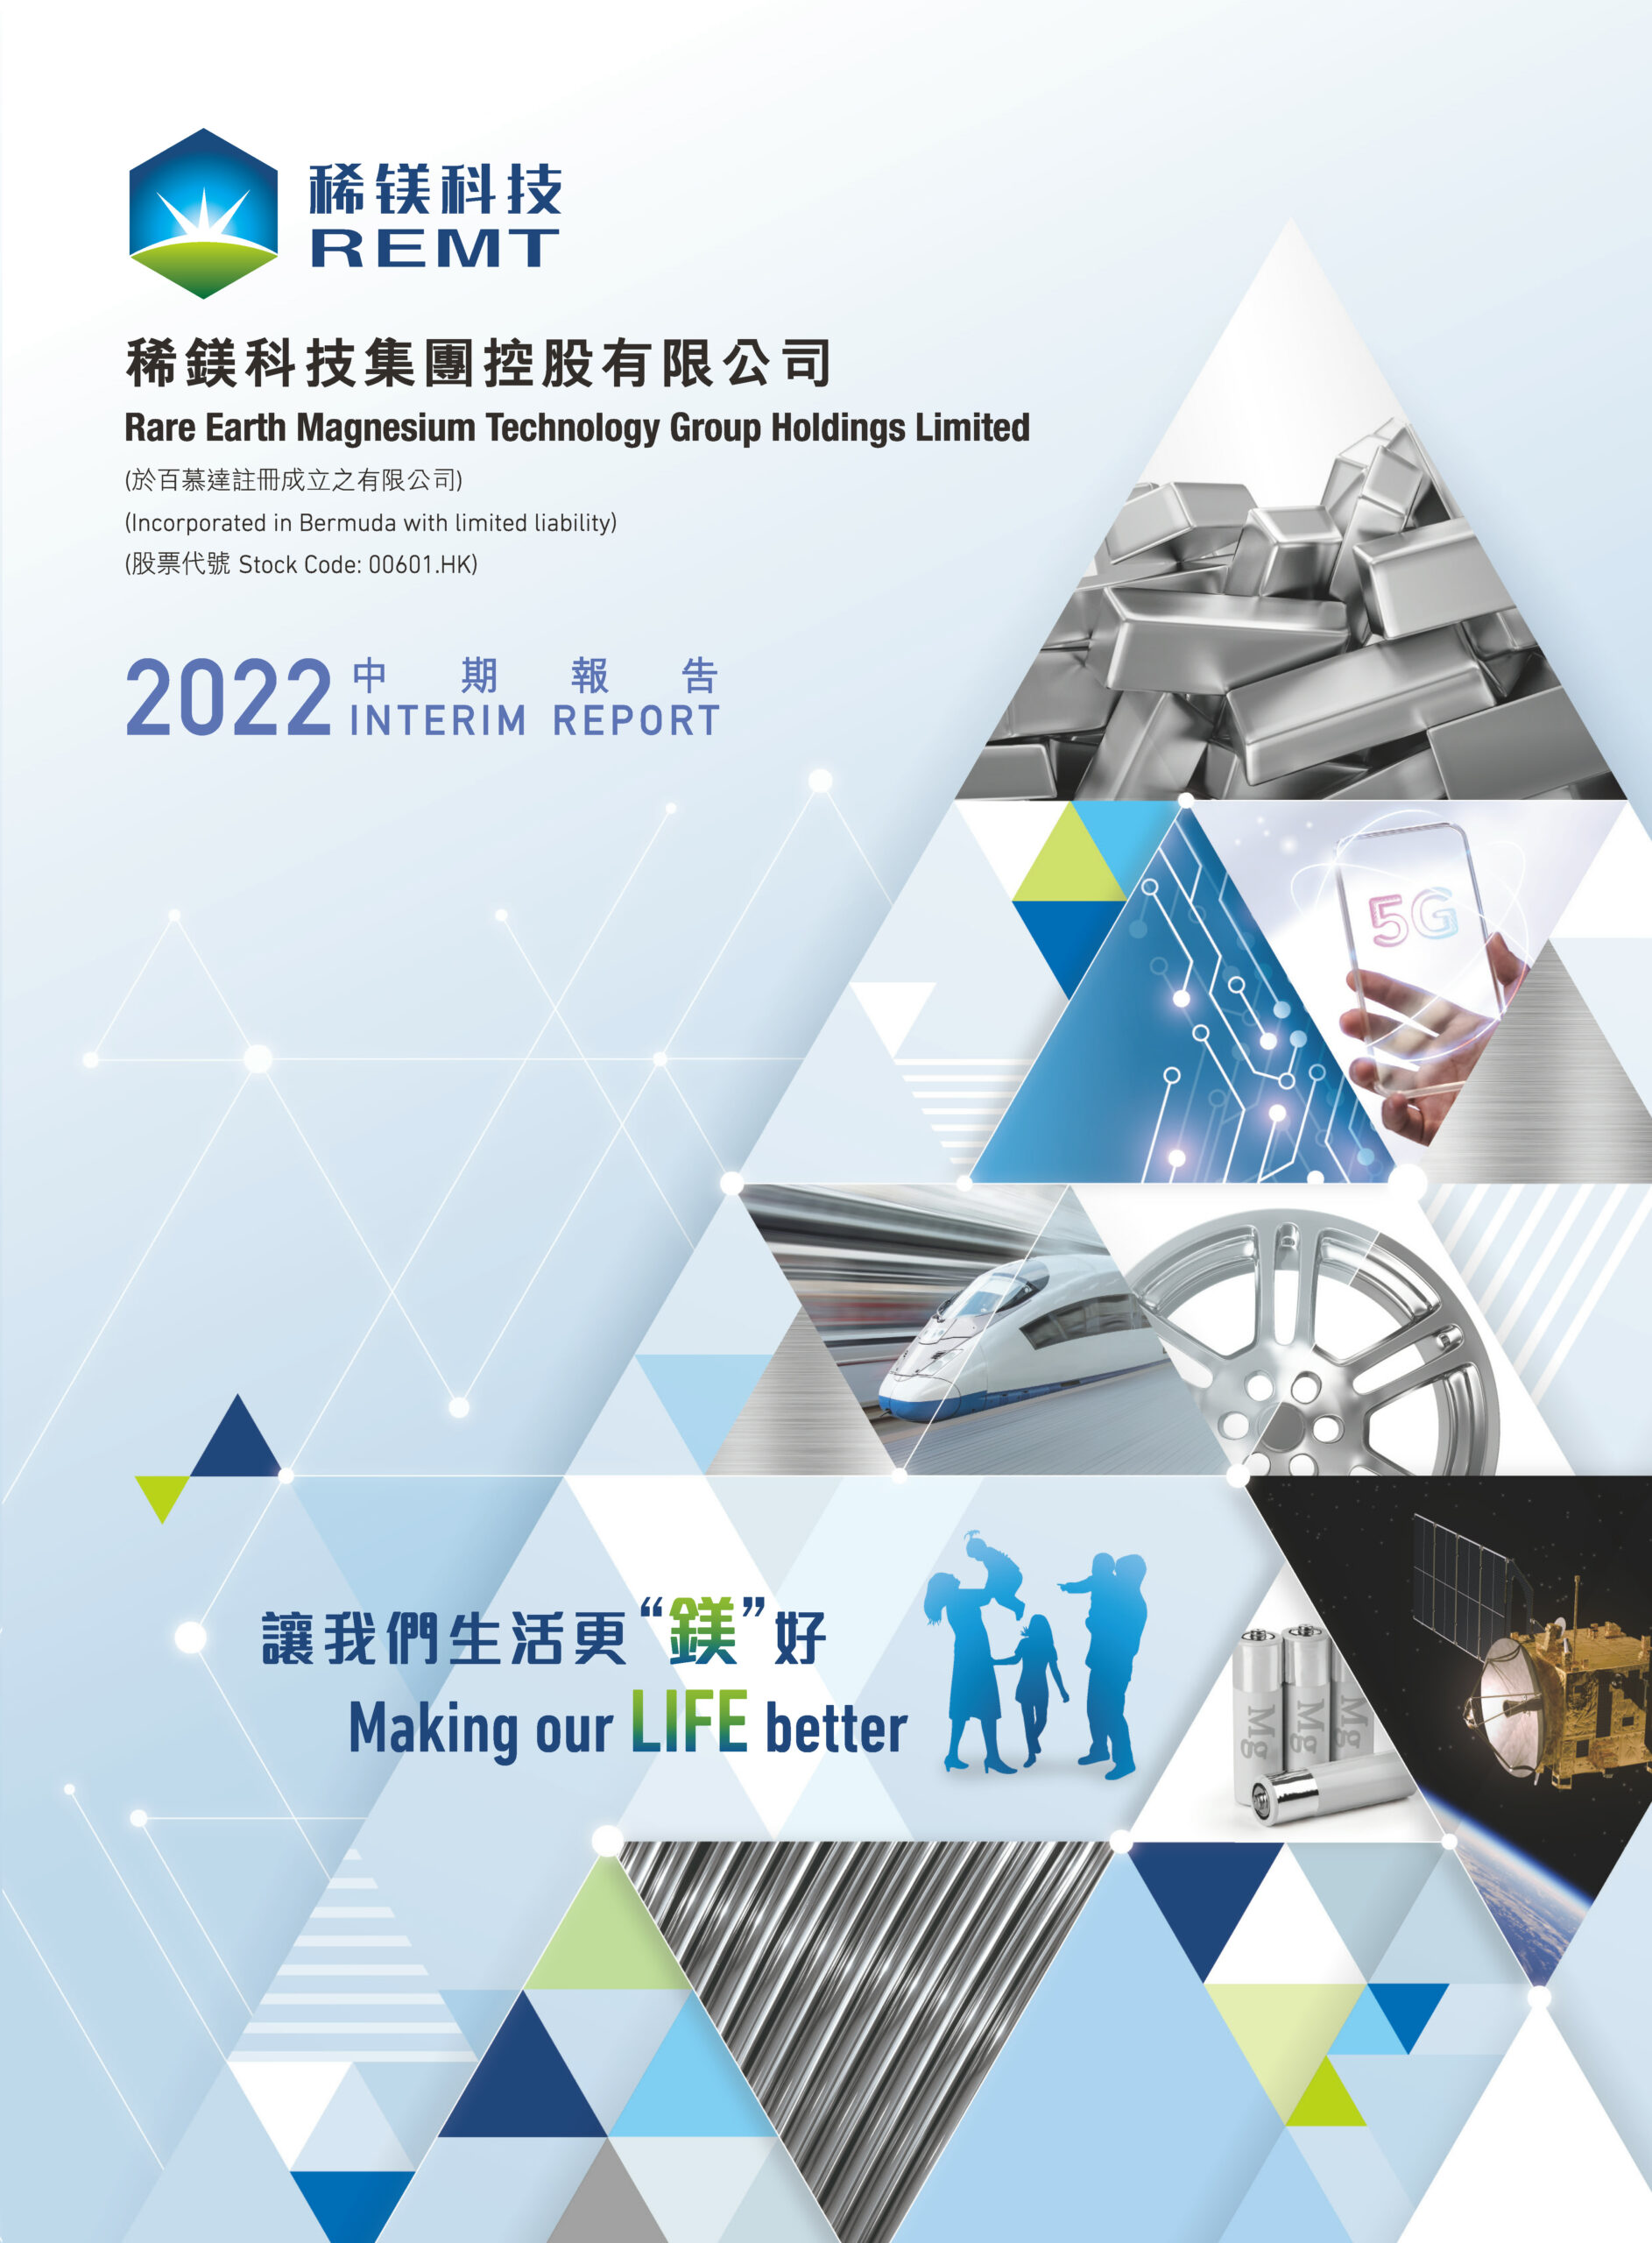 Rare Earth Magnesium Technology Group Holdings Limited